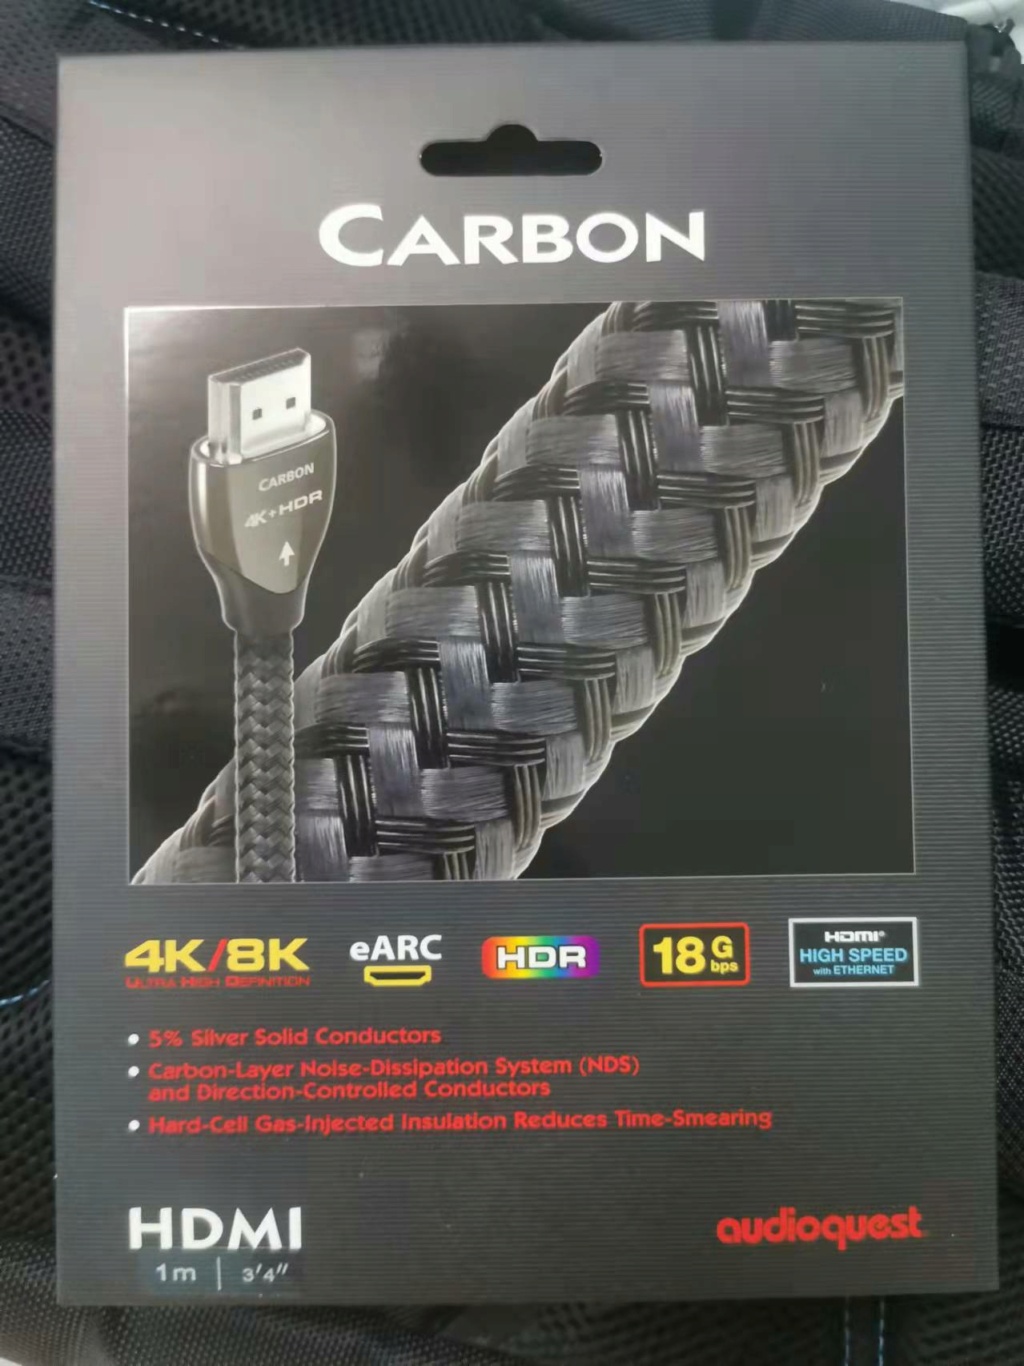 Audioquest Carbon HDMI 4K/8K 1m (New) Revised Mmexpo16